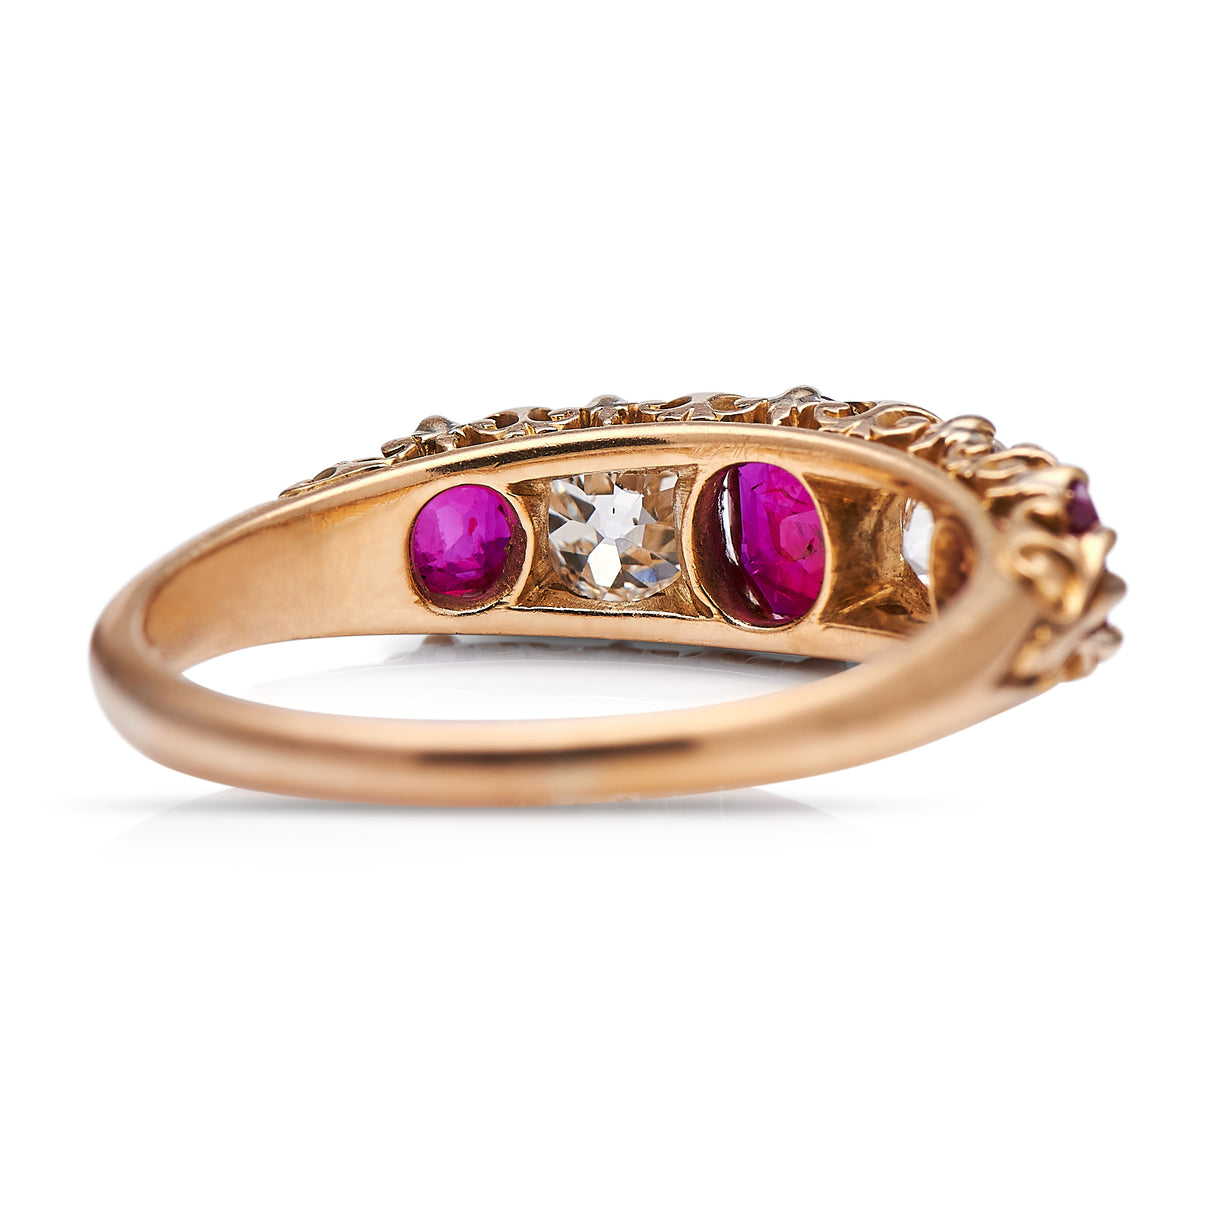 Antique Engagement Rings | Antique Ring Boutique | Vintage Engagement Rings | Antique Engagement Rings | Antique Jewellery company | Vintage Jewellery Victorian, 18ct Gold, Ruby and Diamond Ring